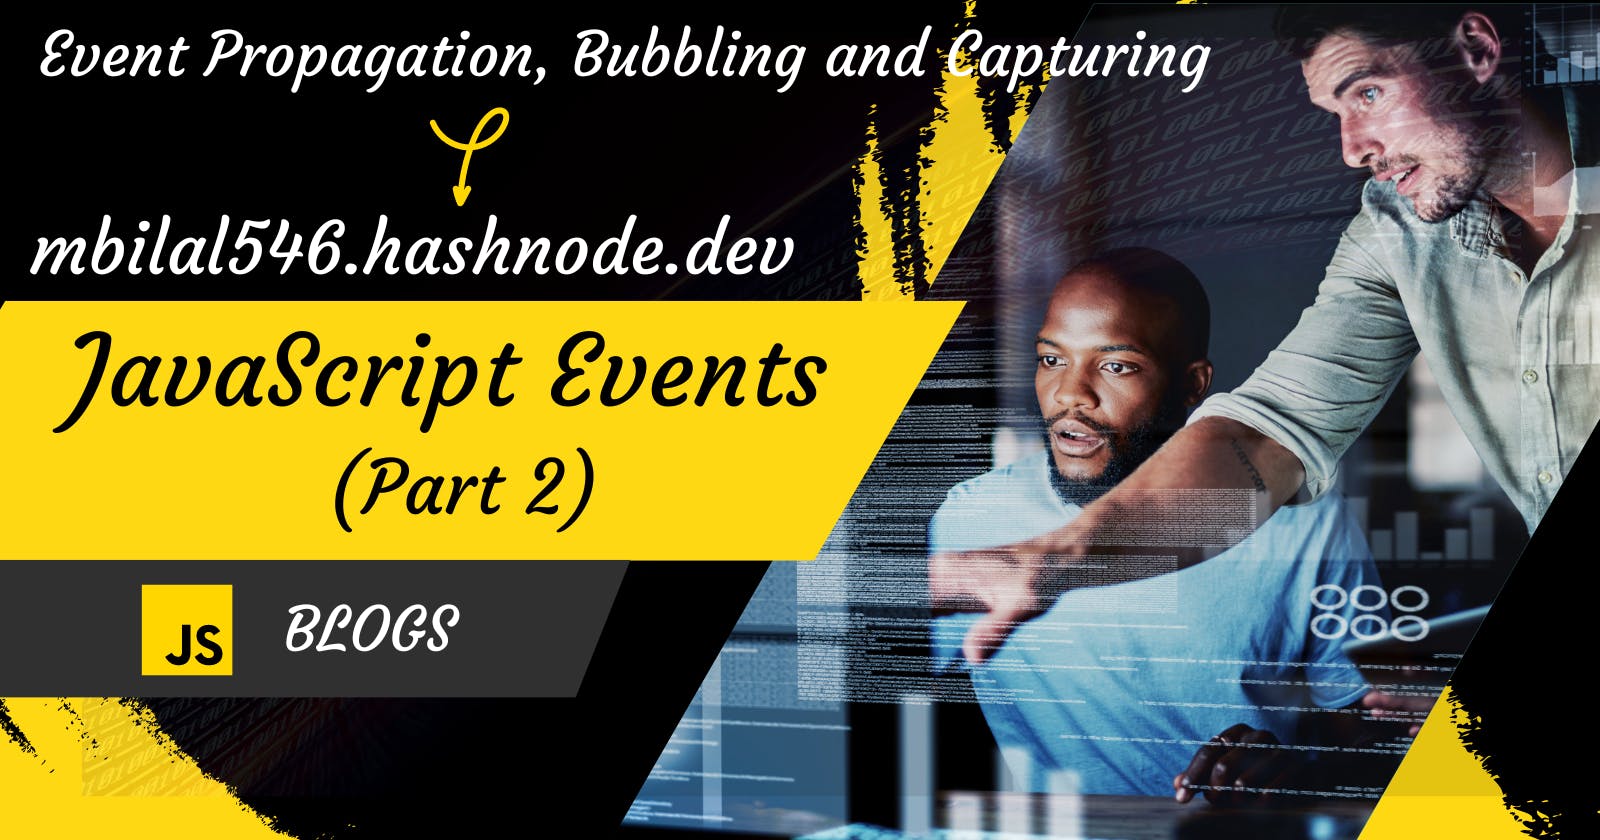 JavaScript Events (Part 2) Propagation: Bubbling, Capturing, Deligation, Target and many more in depth